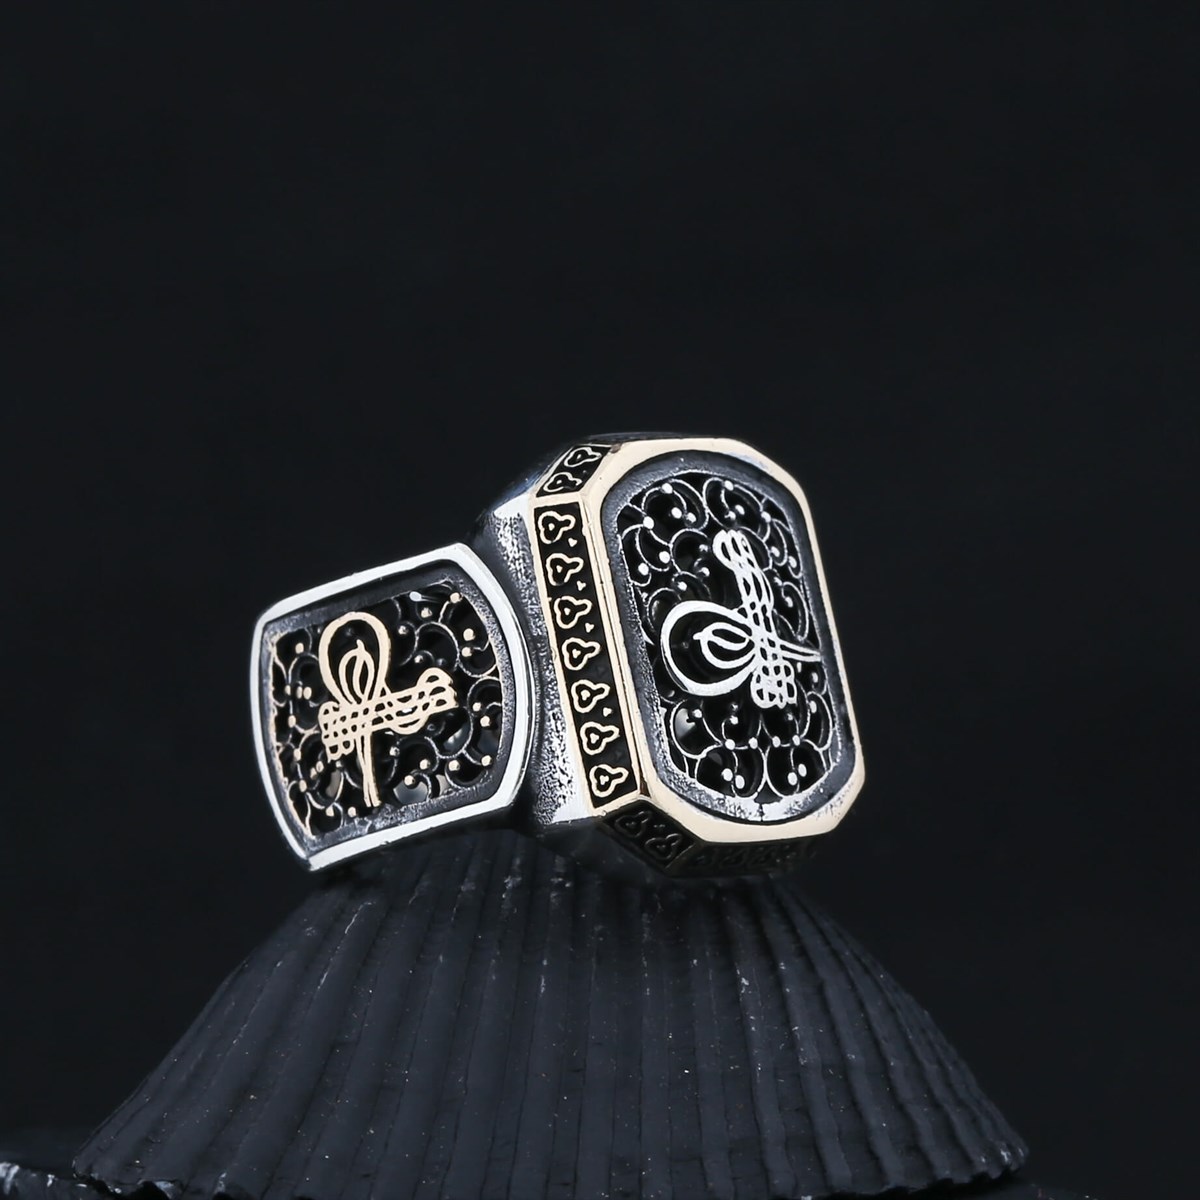 Blackout Tugra Motif Embroidered Sterling Silver Men's Ring